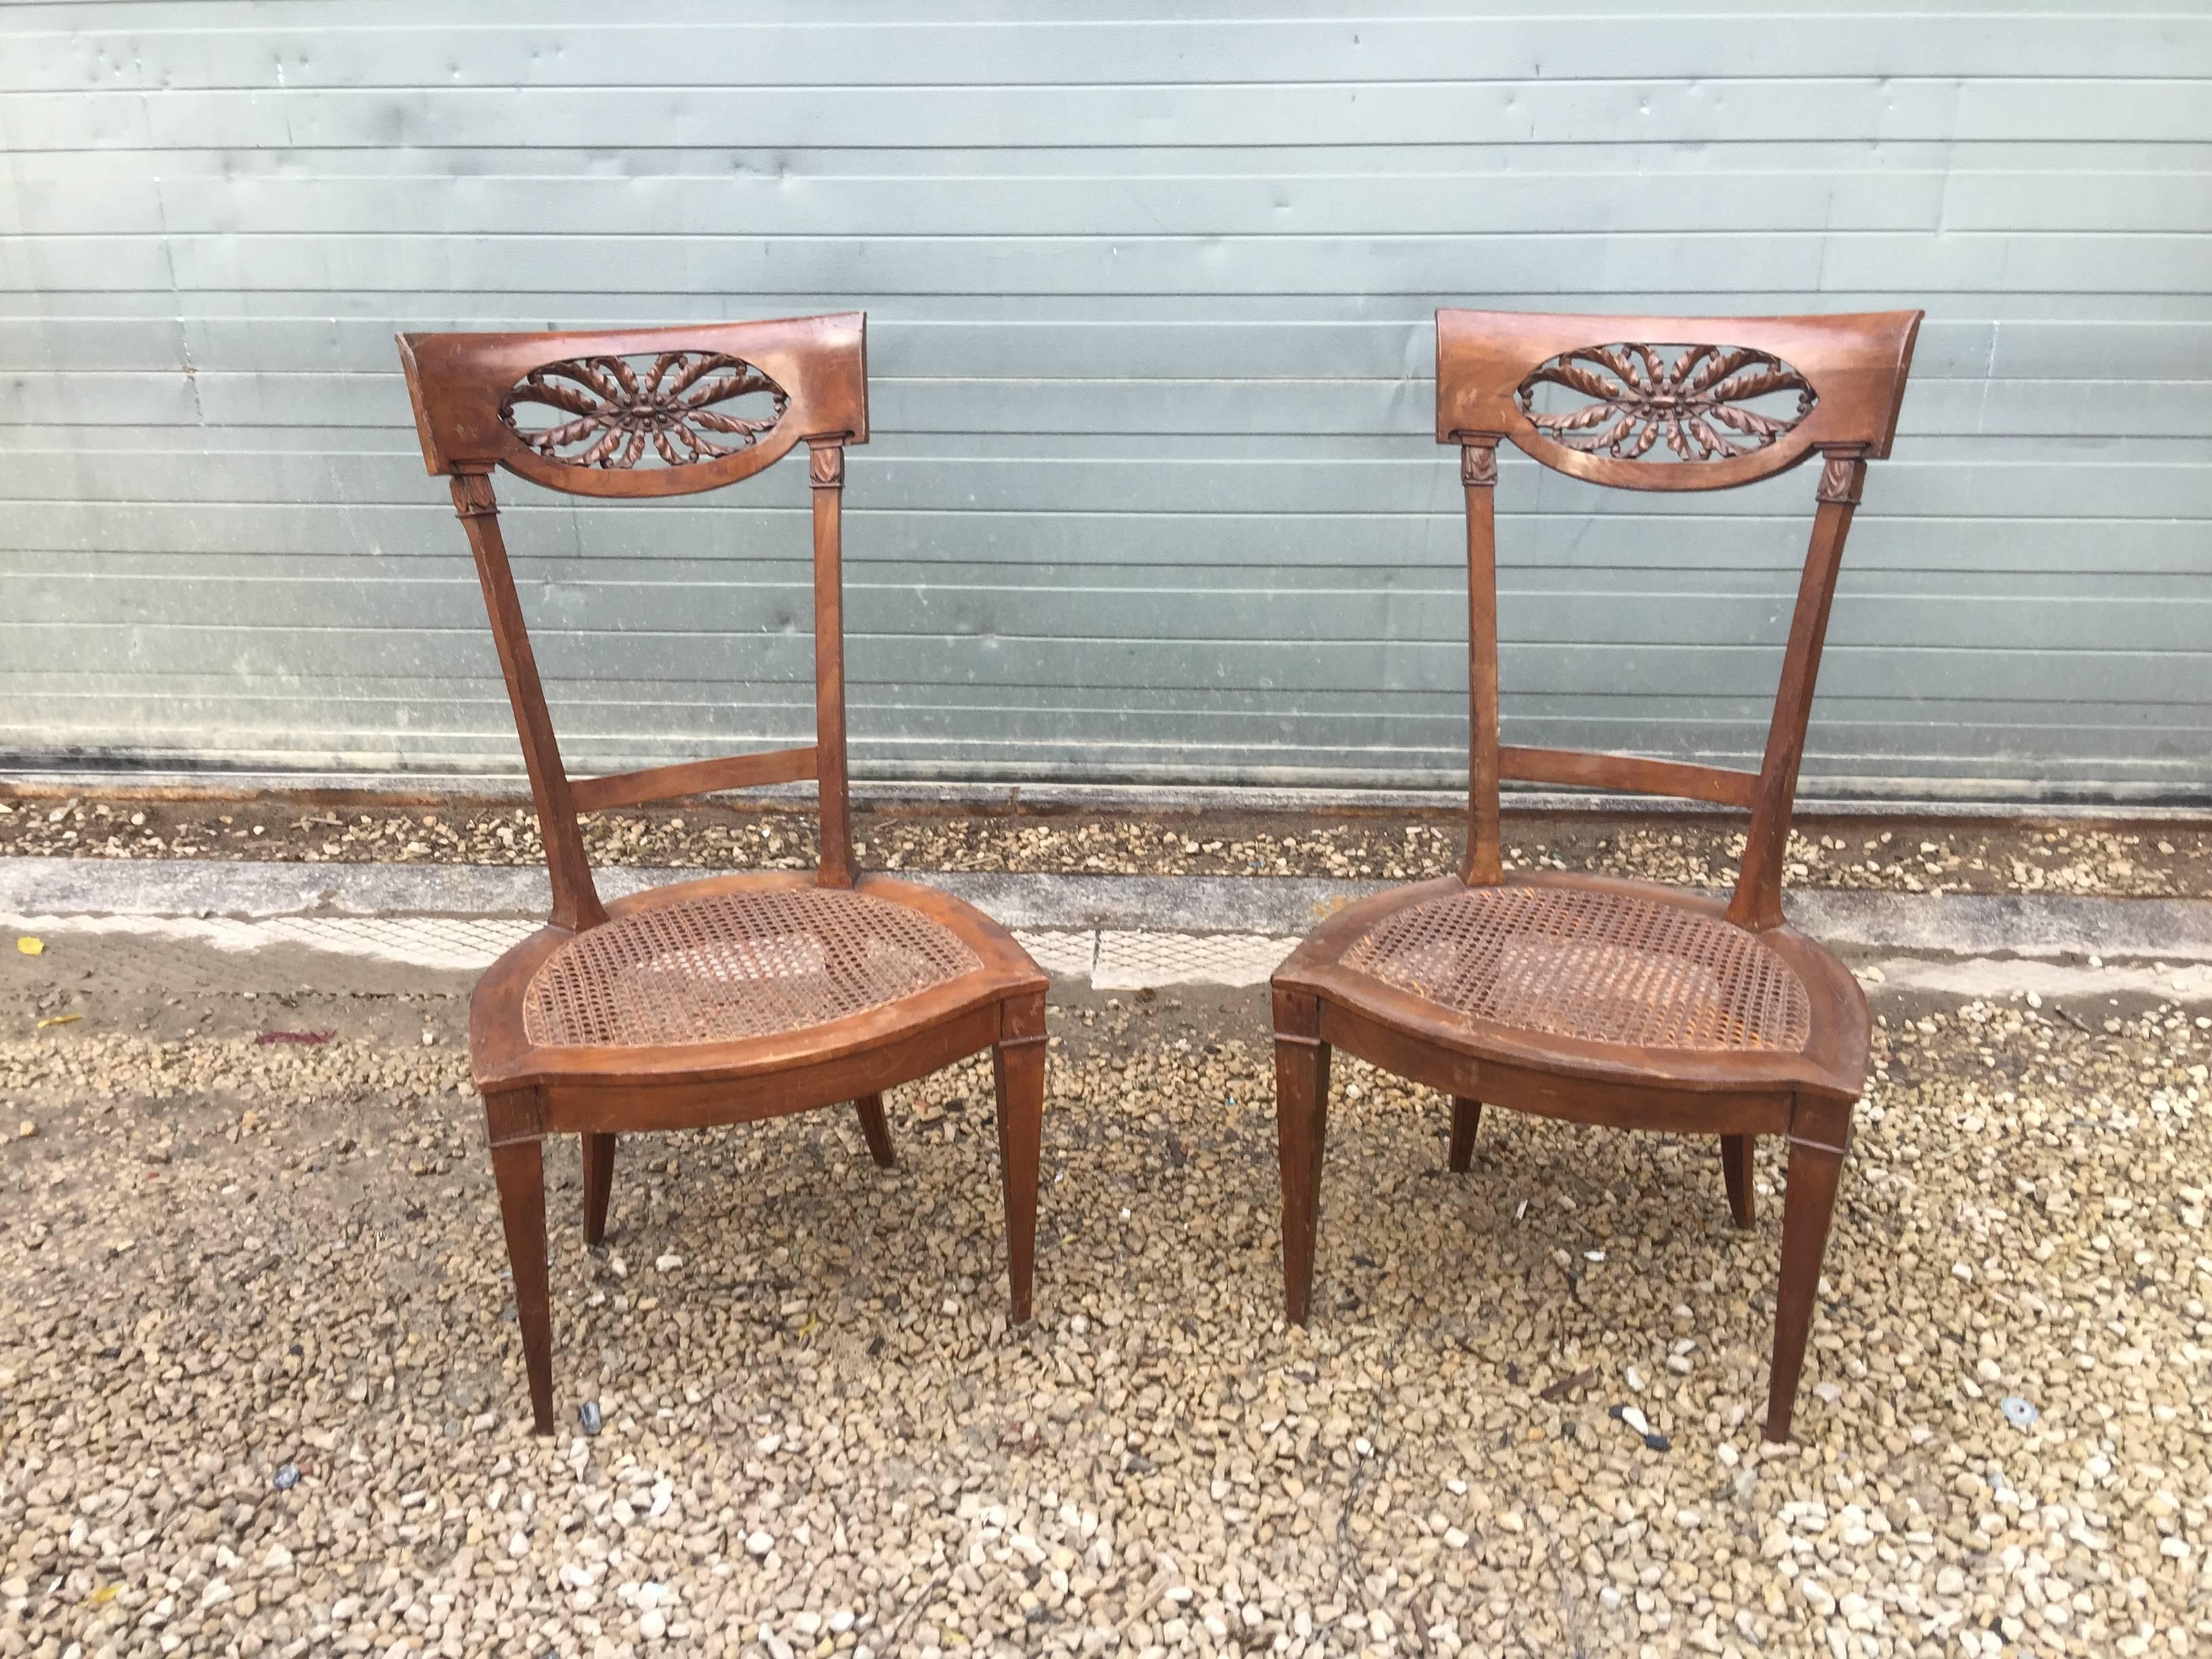 Louis XVI Pair of Ancient Cherry Wood Chairs, 18th Century For Sale